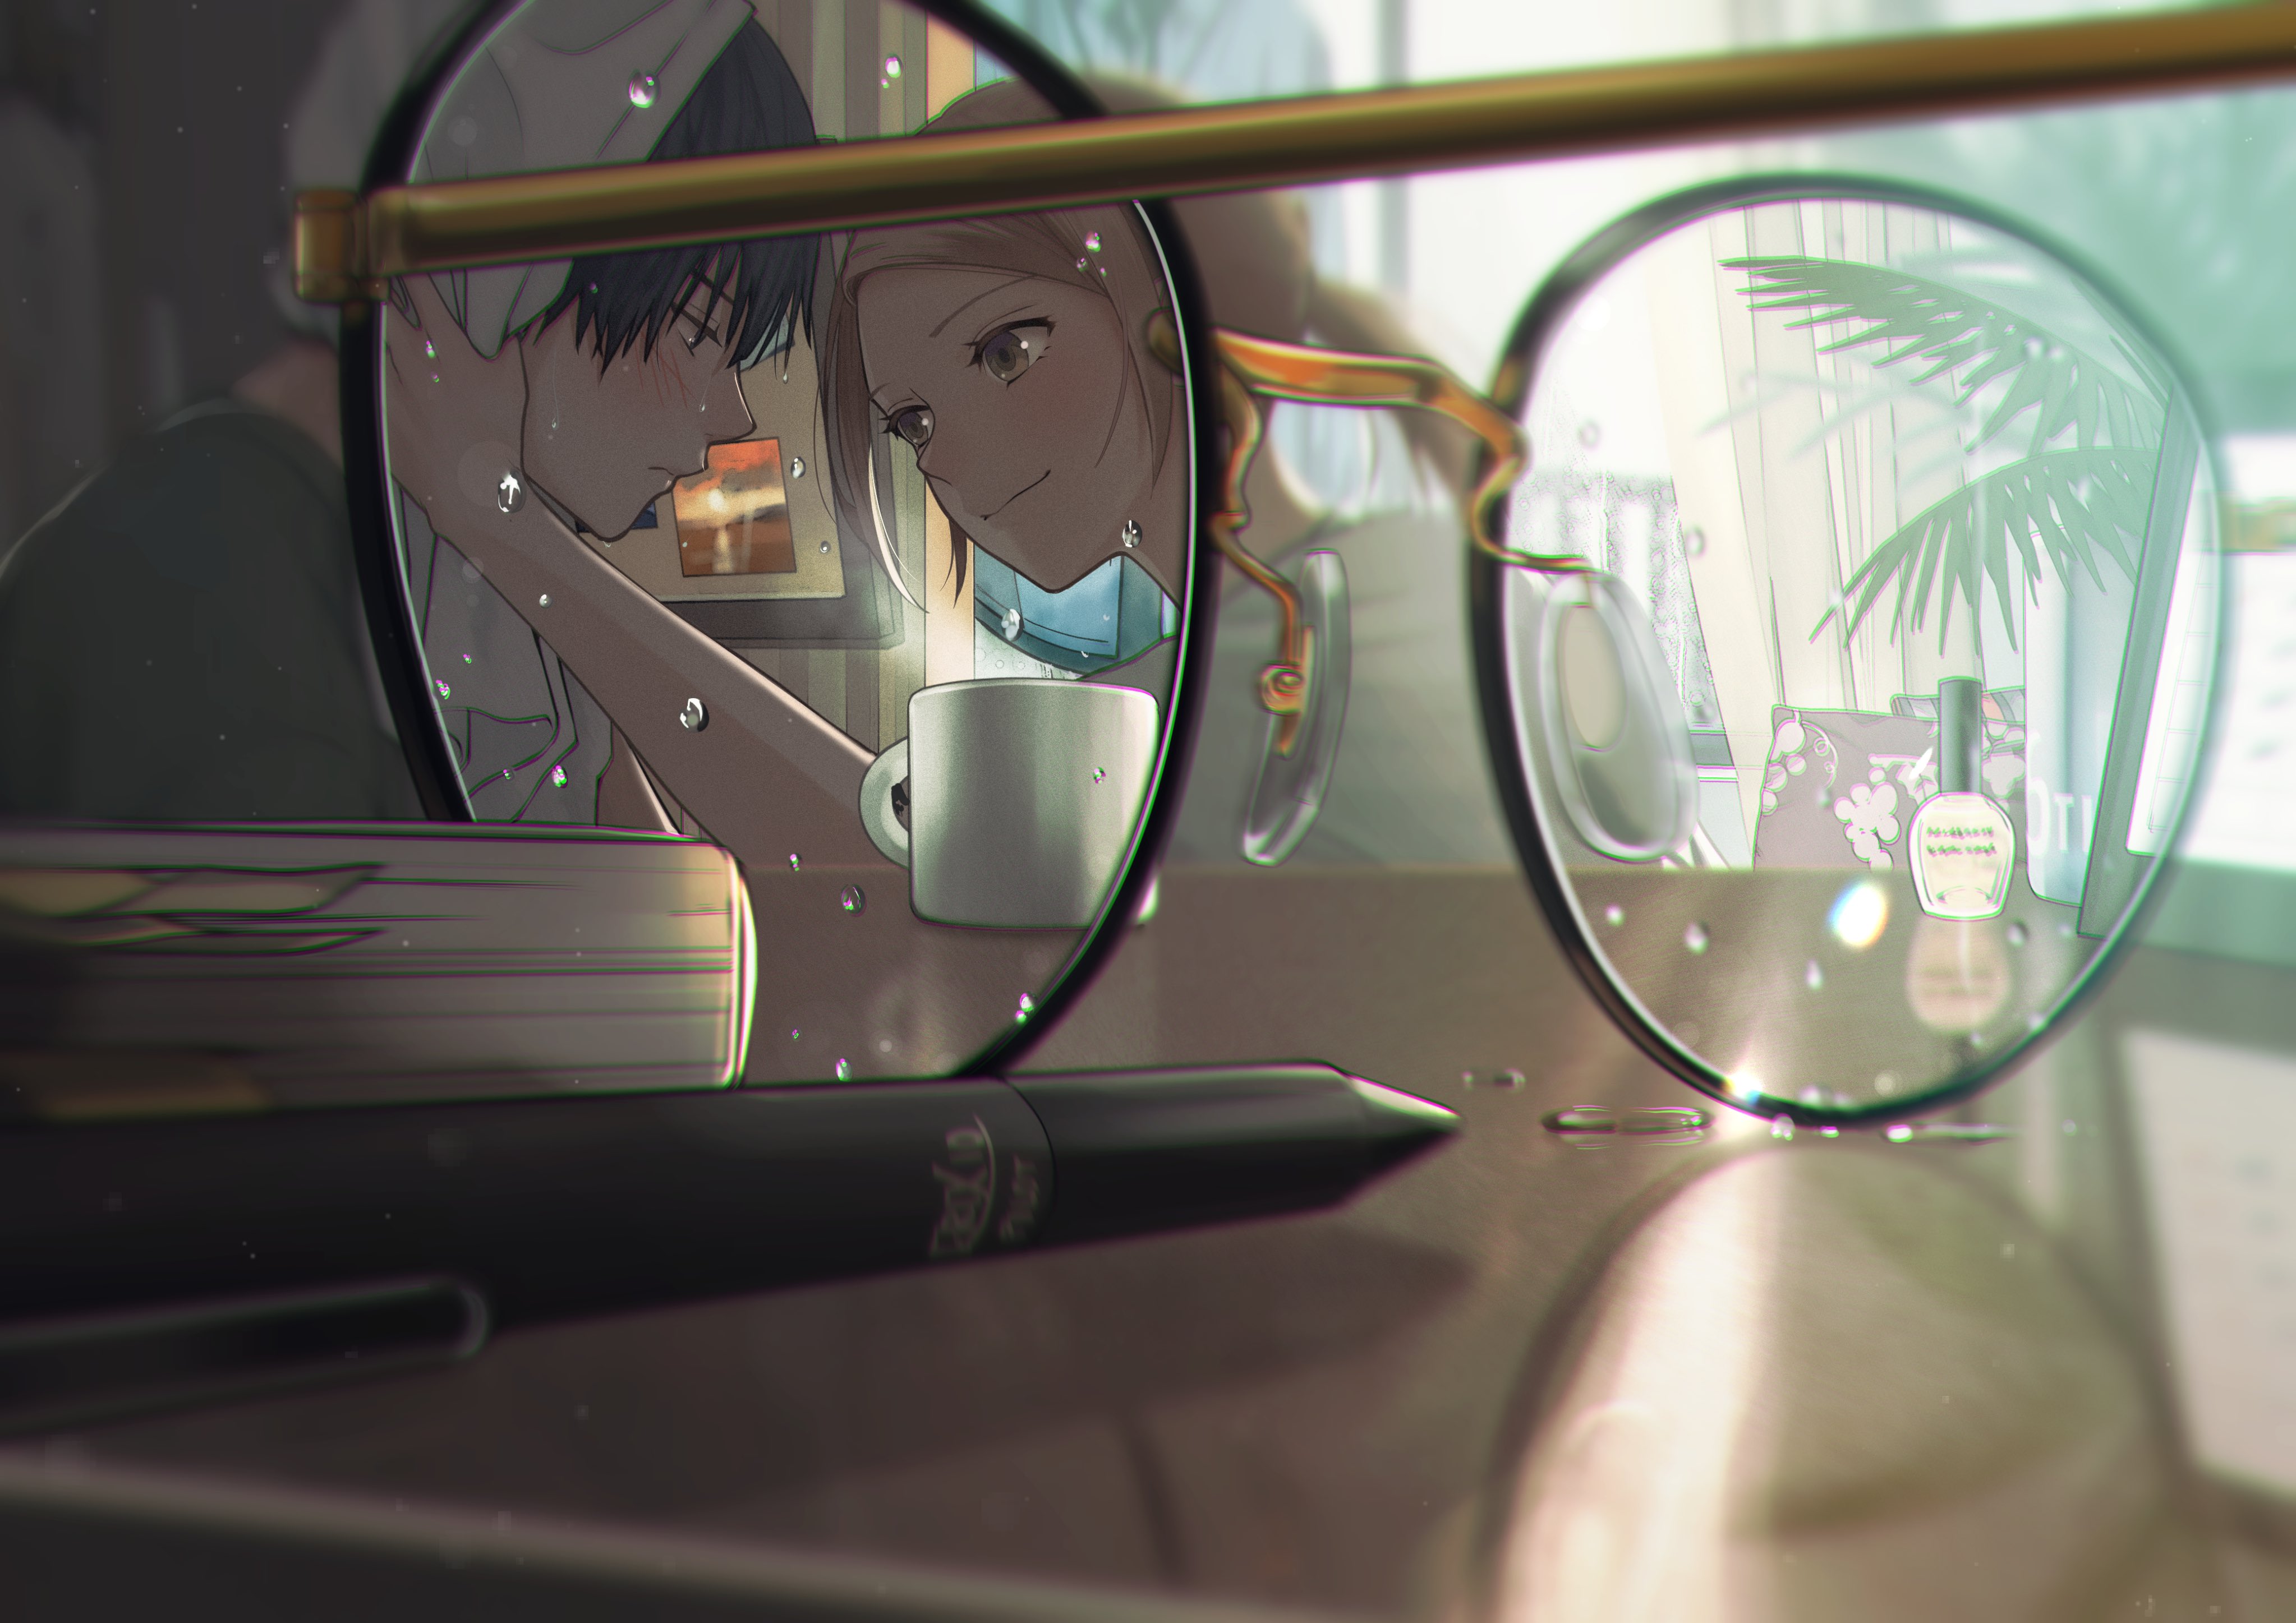 Anime 4093x2894 anime anime girls glasses anime couple anime boys MacaronK couple closed mouth smiling reflection indoors women indoors men indoors leaves cup towel wet water drops sunlight pens books desk nail polish